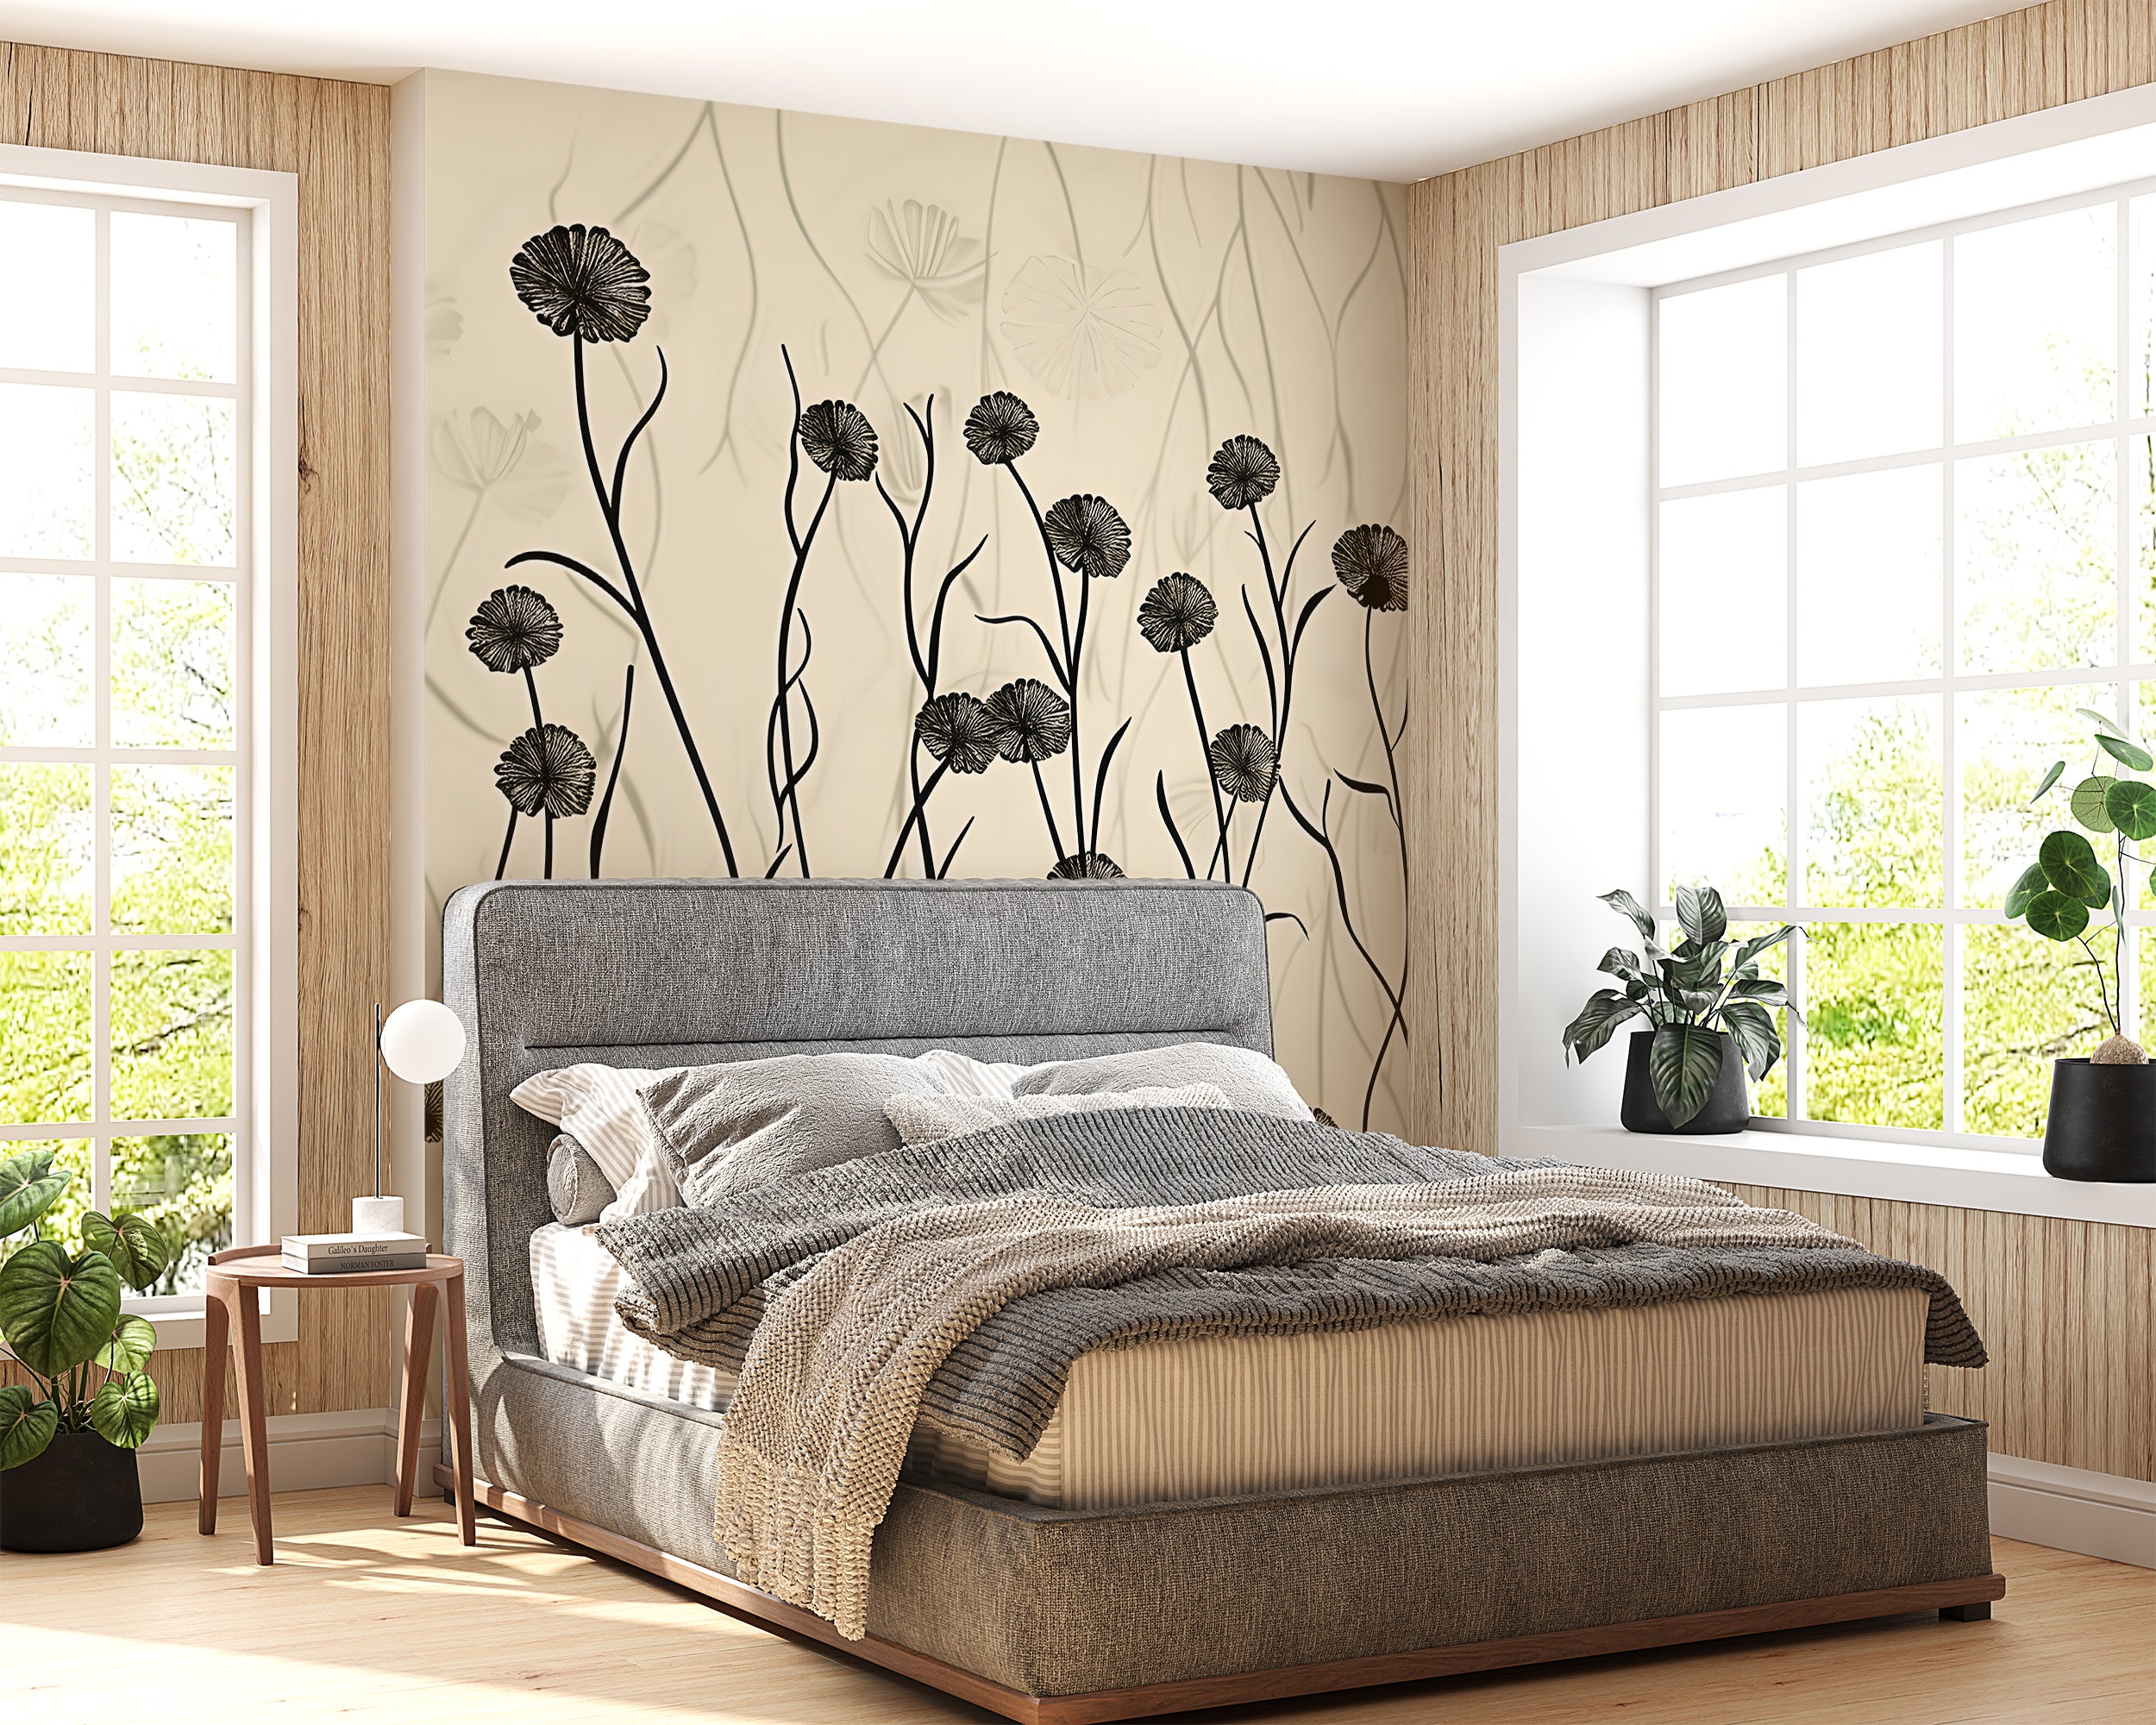 Beige Plants Wall Mural, Light Botanical Wallpaper, Abstract Floral Wall Decal, Peel and Stick Beige Flower Mural, Meadow Flowers Mural